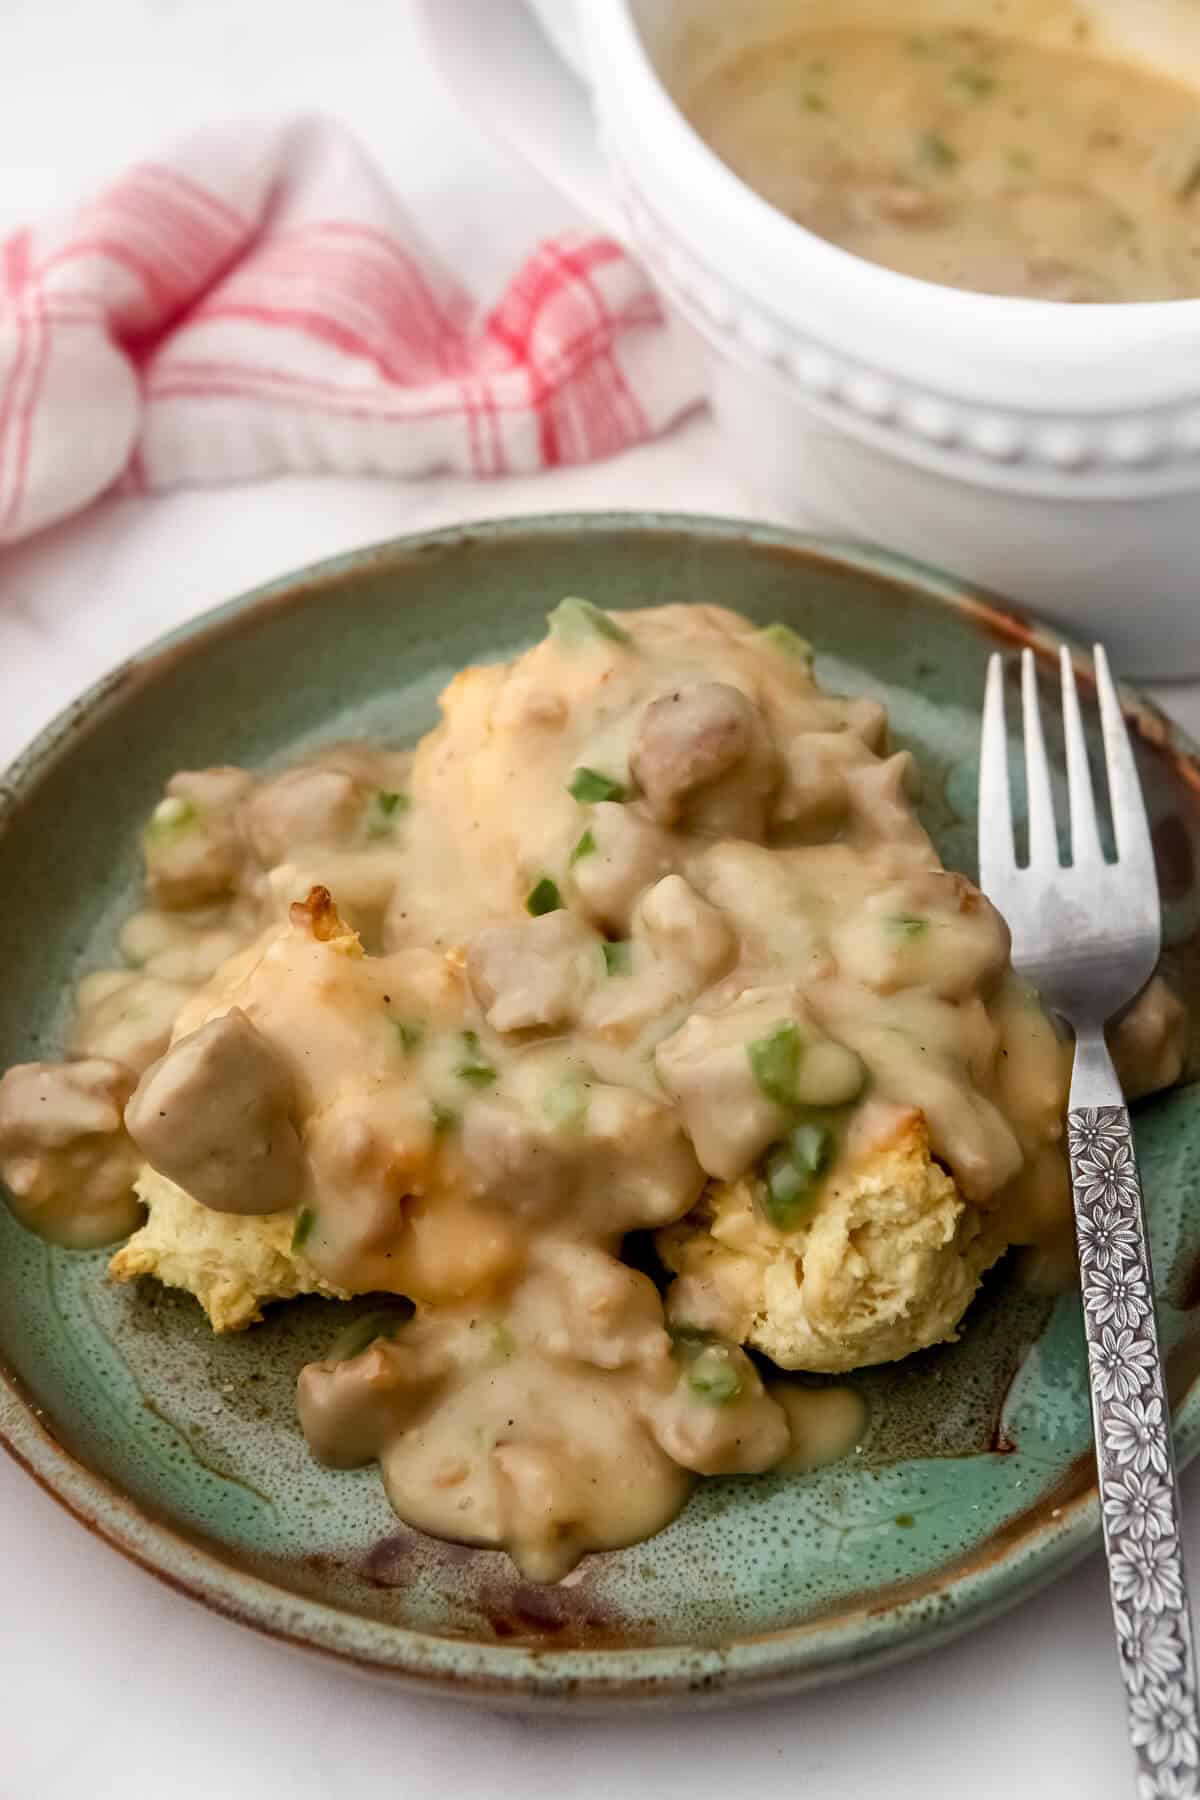 Vegan biscuits with sausage gravy poured over them on a plate with a gravy boat on the side.